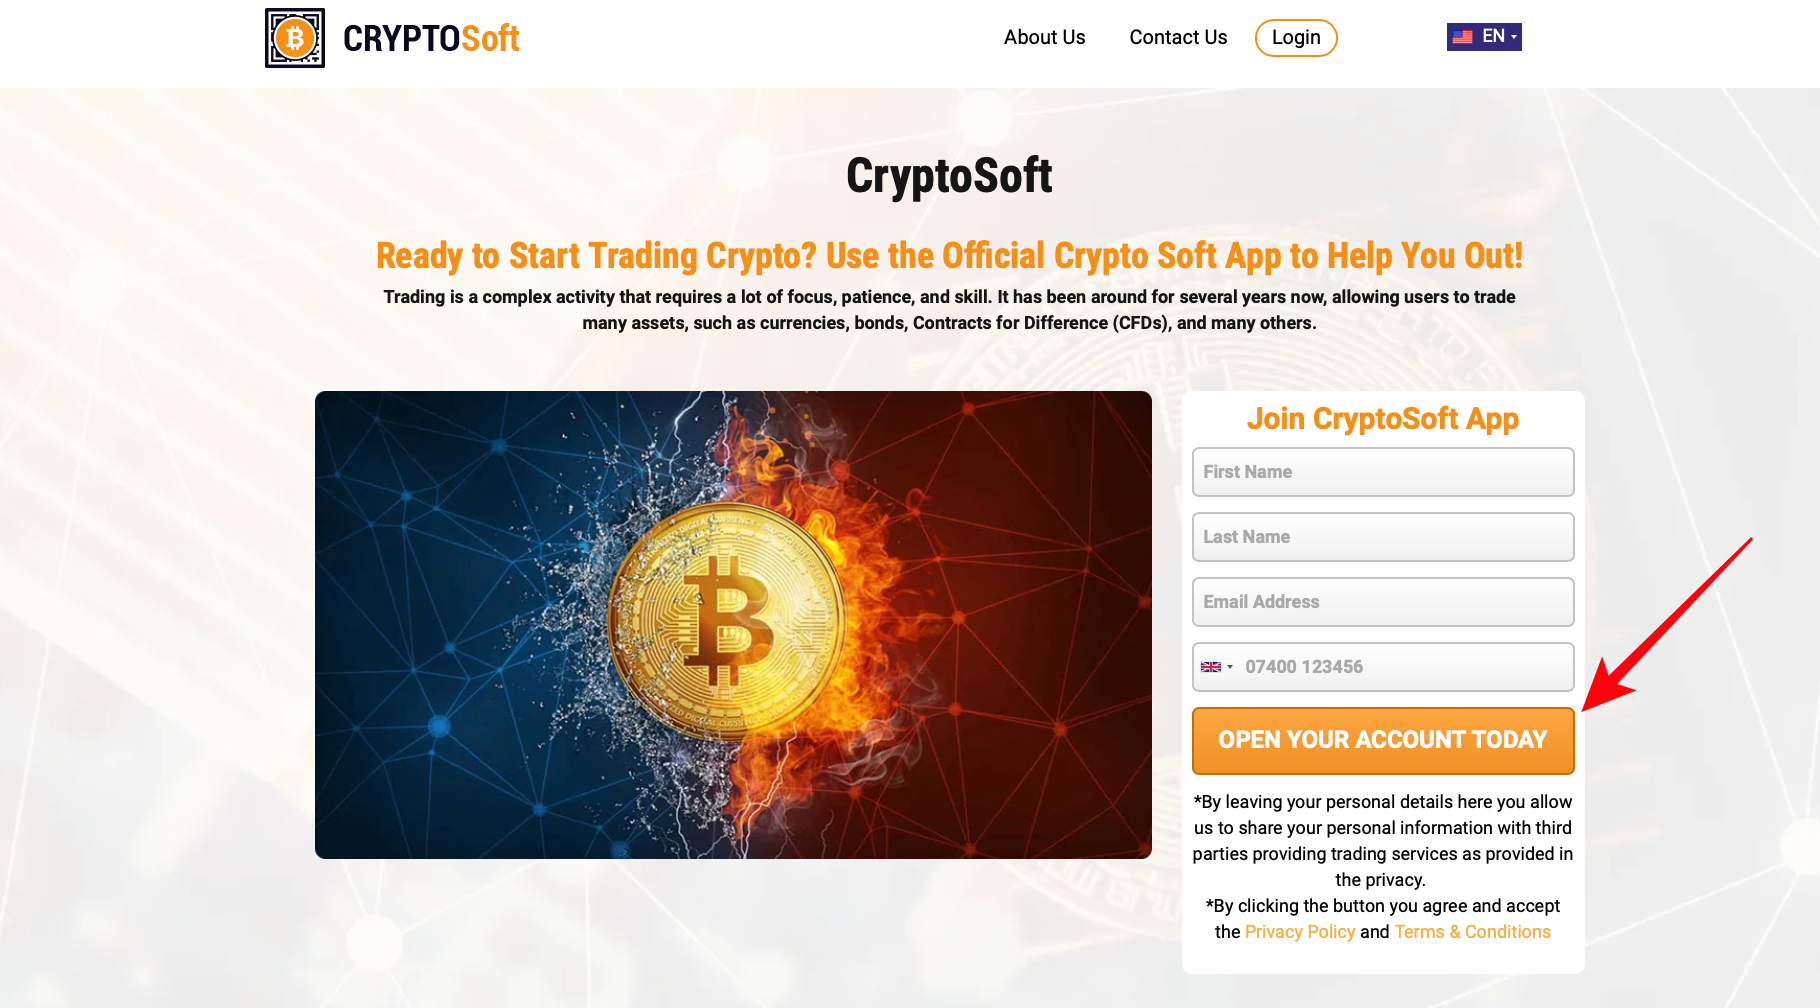 How to sign up with CryptoSoft